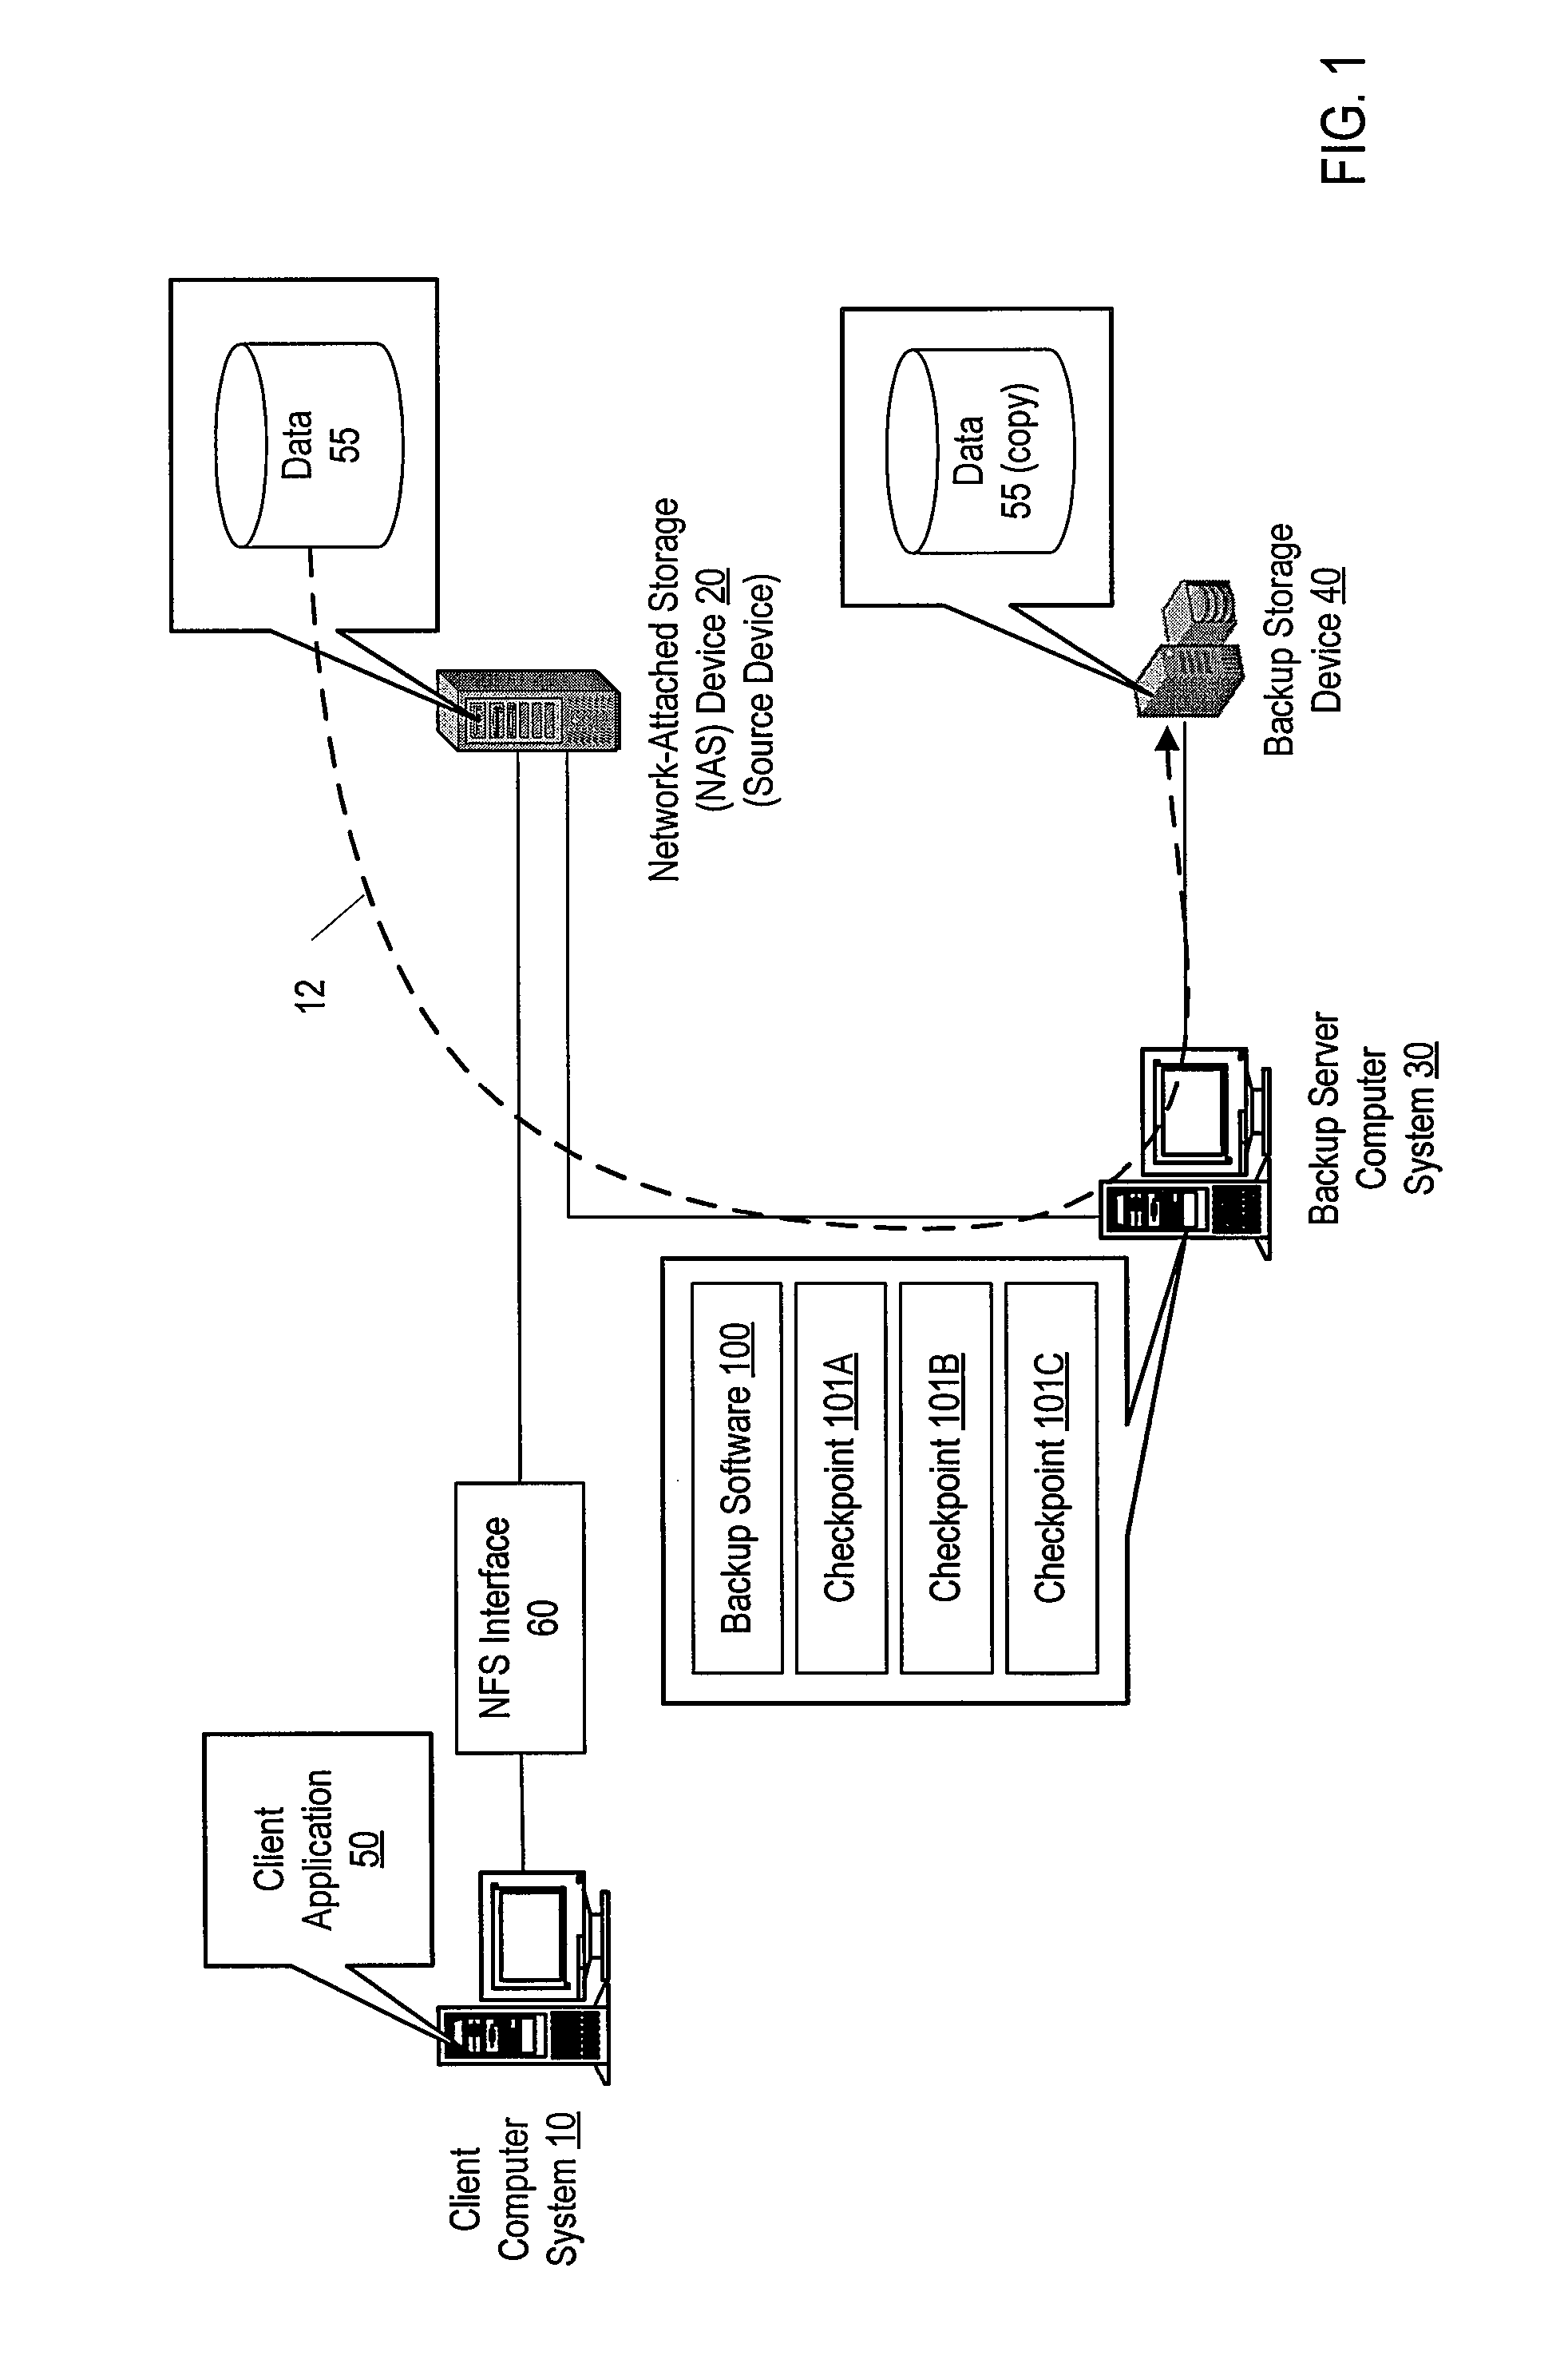 Computer data backup operation with time-based checkpoint intervals